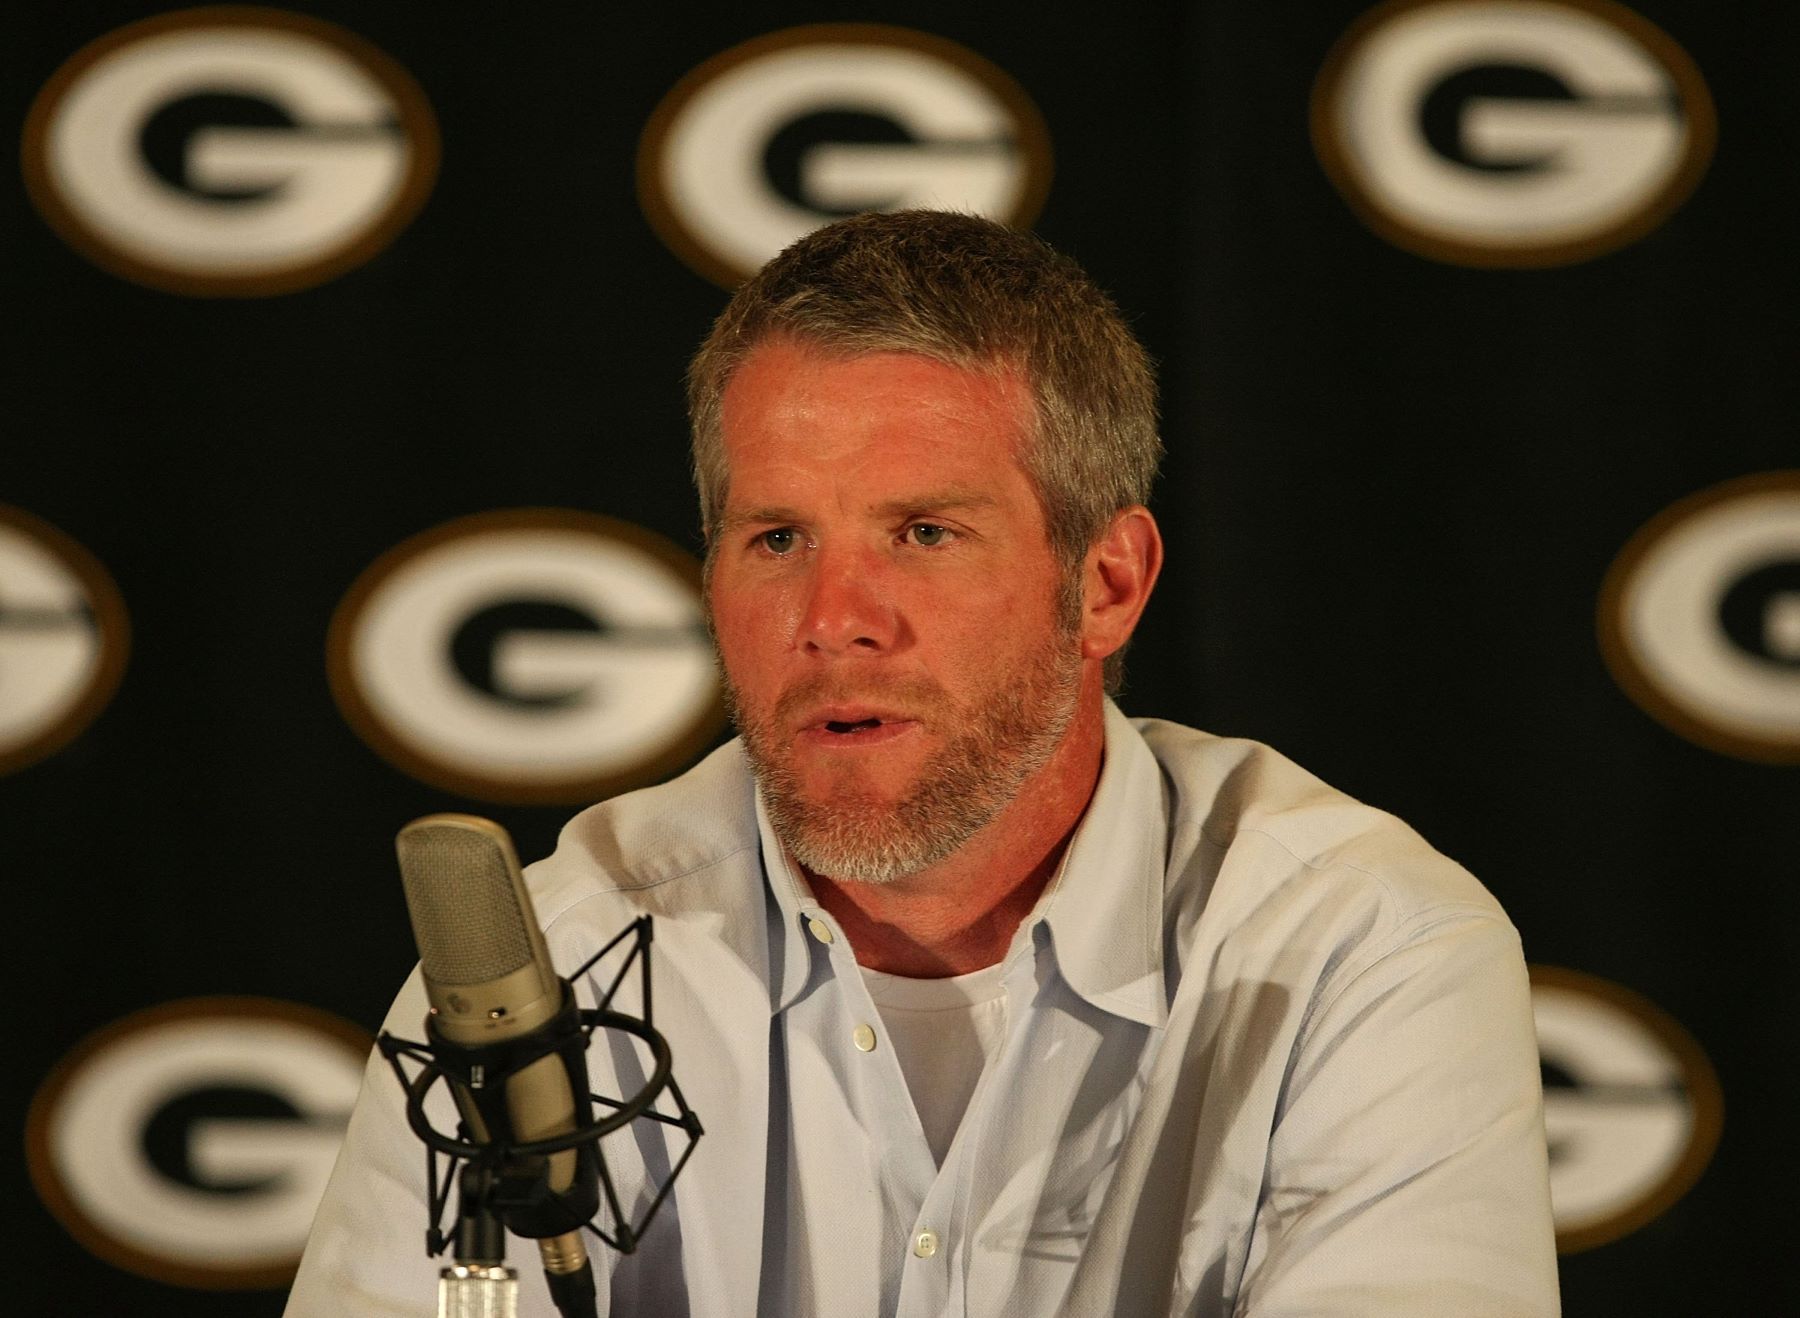 Brett Favre announcing his retirement from the Green Bay Packers at a press conference in Green Bay, Wisconsin